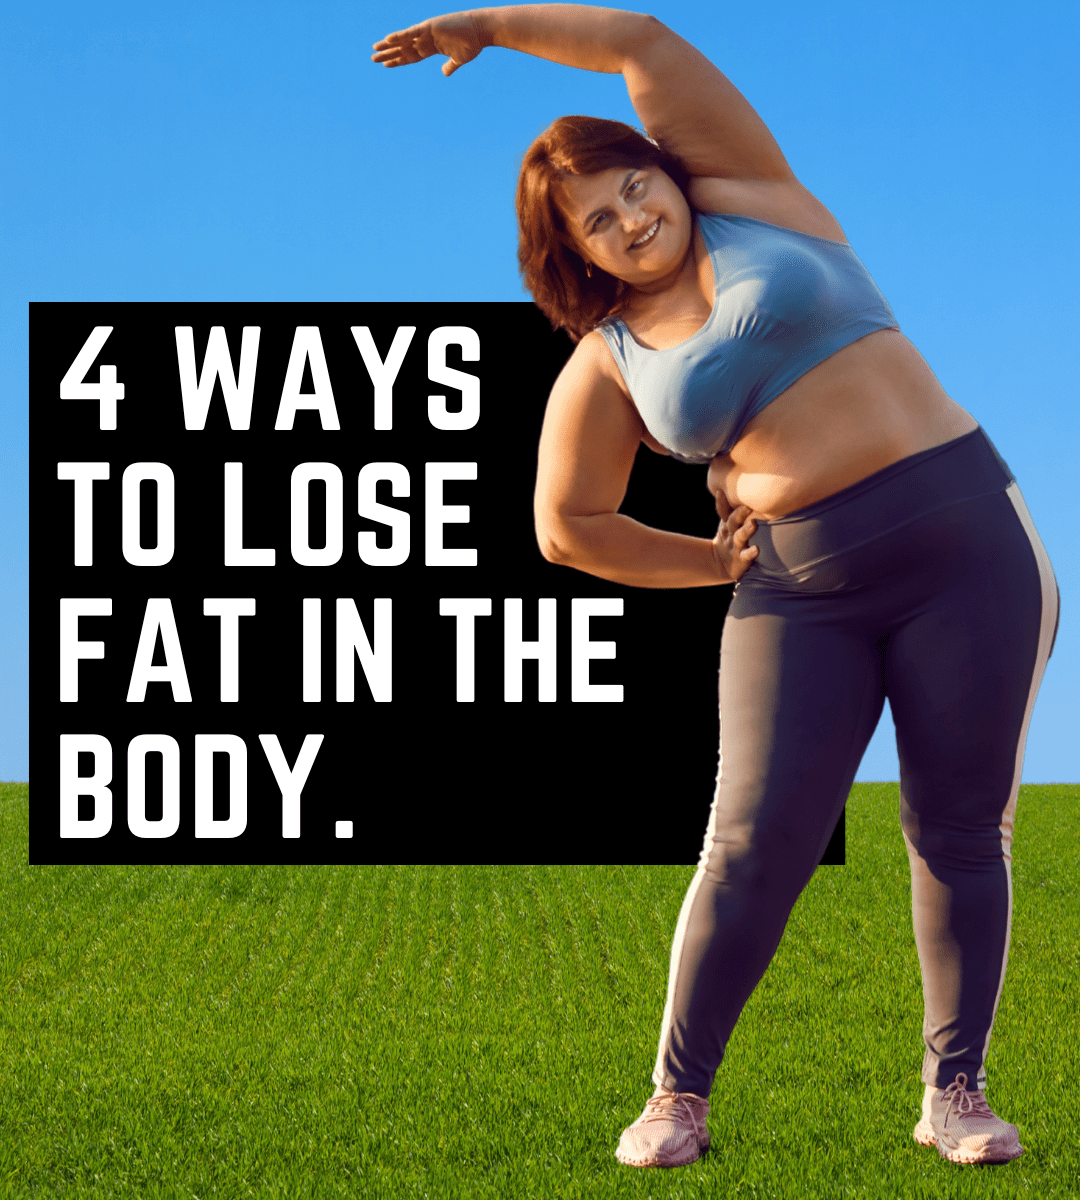 4 Ways to Lose Fat in the Body